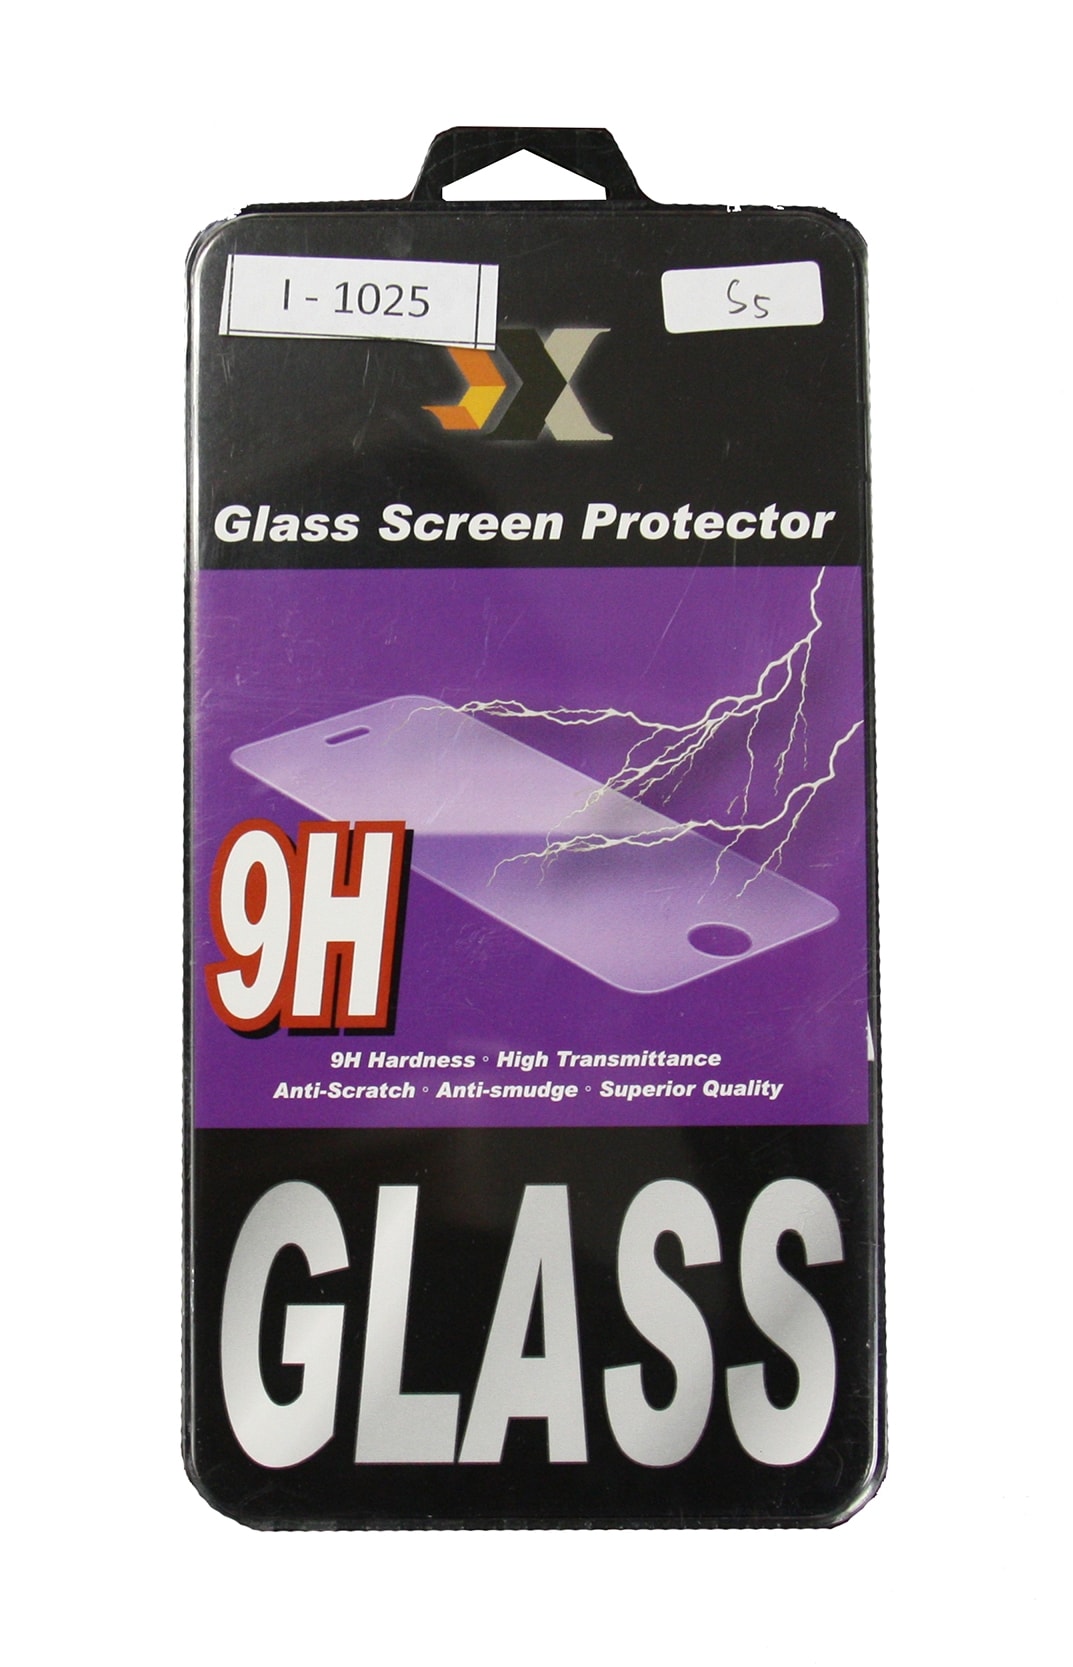 ORE International Sam-S5 Glass Screen Protector - Bubble Free & Sensitive Touch - Improve LCD Protection Film | I-1025 -  Ore Furniture